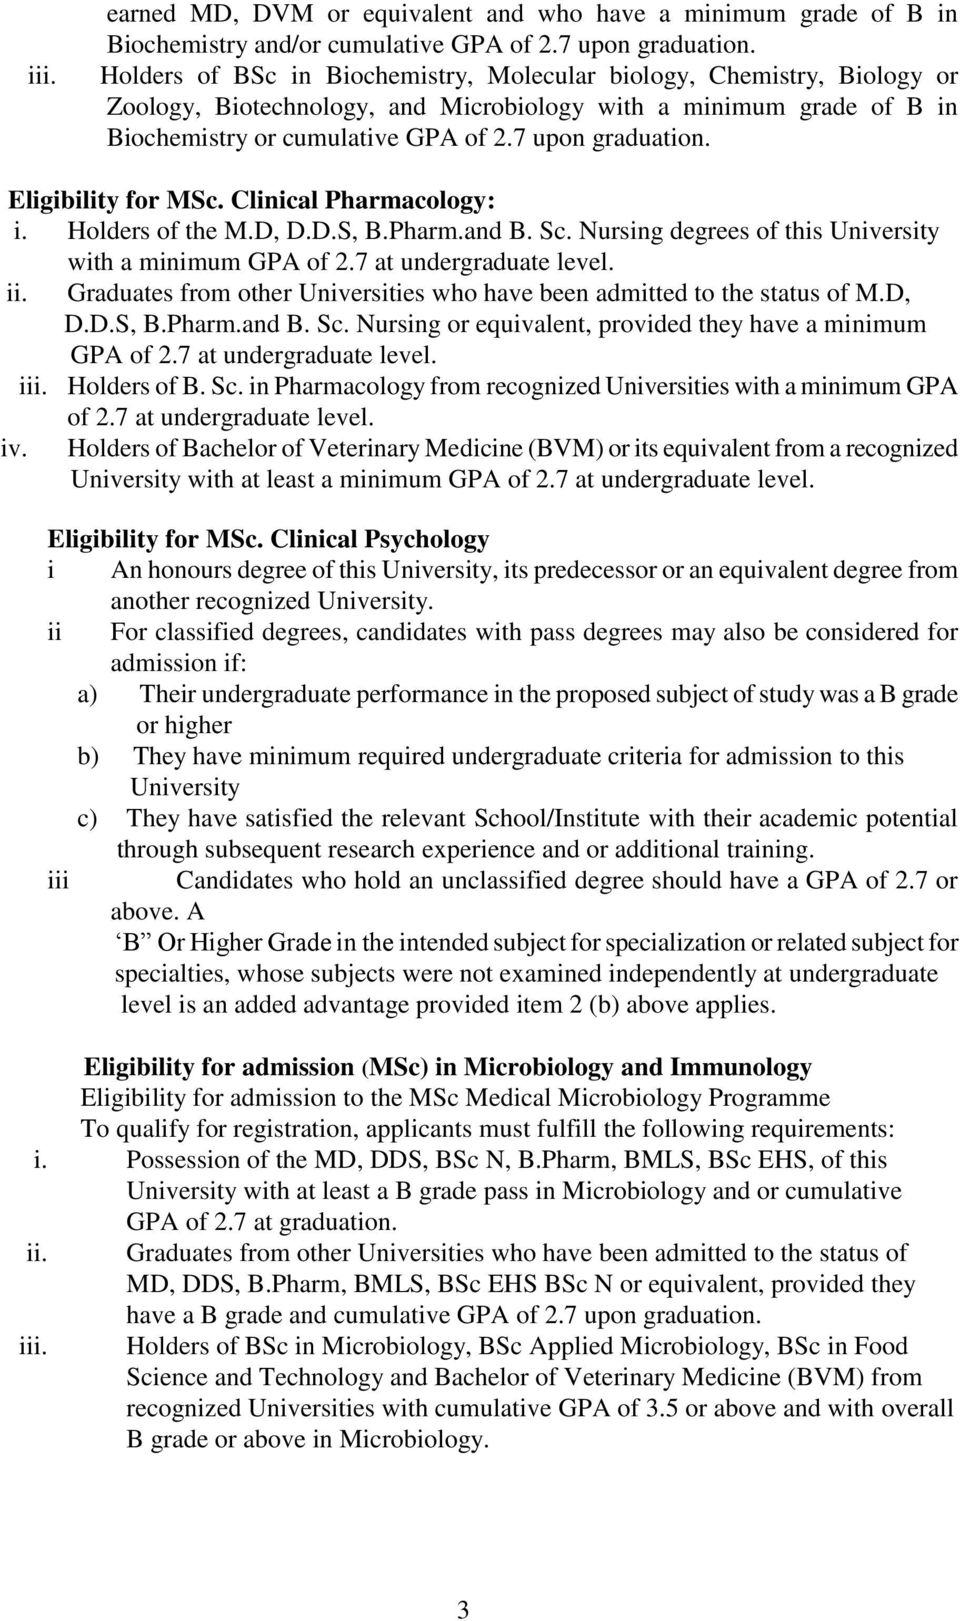 Eligibility for MSc. Clinical Pharmacology: i. Holders of the M.D, D.D.S, B.Pharm.and B. Sc. Nursing degrees of this University with a minimum GPA of 2.7 at undergraduate level. ii.